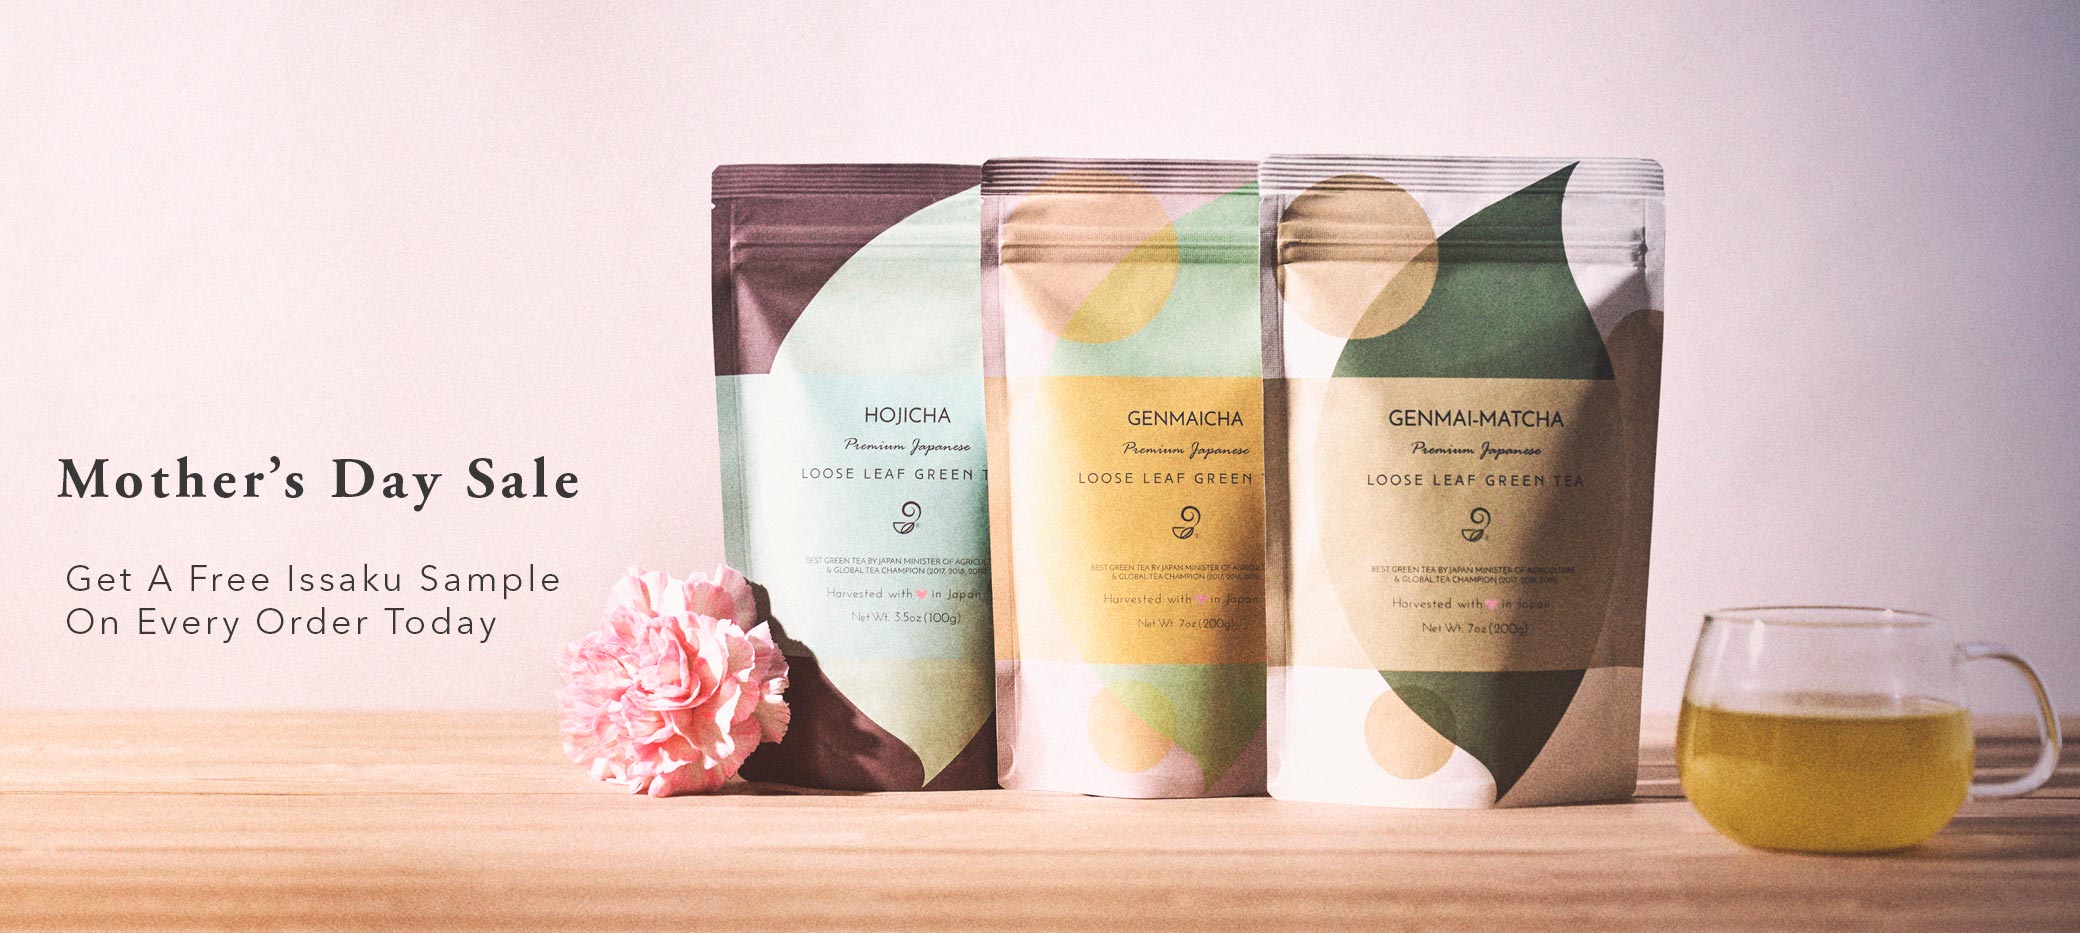 Mother's Day Sale - Japanese Green Tea